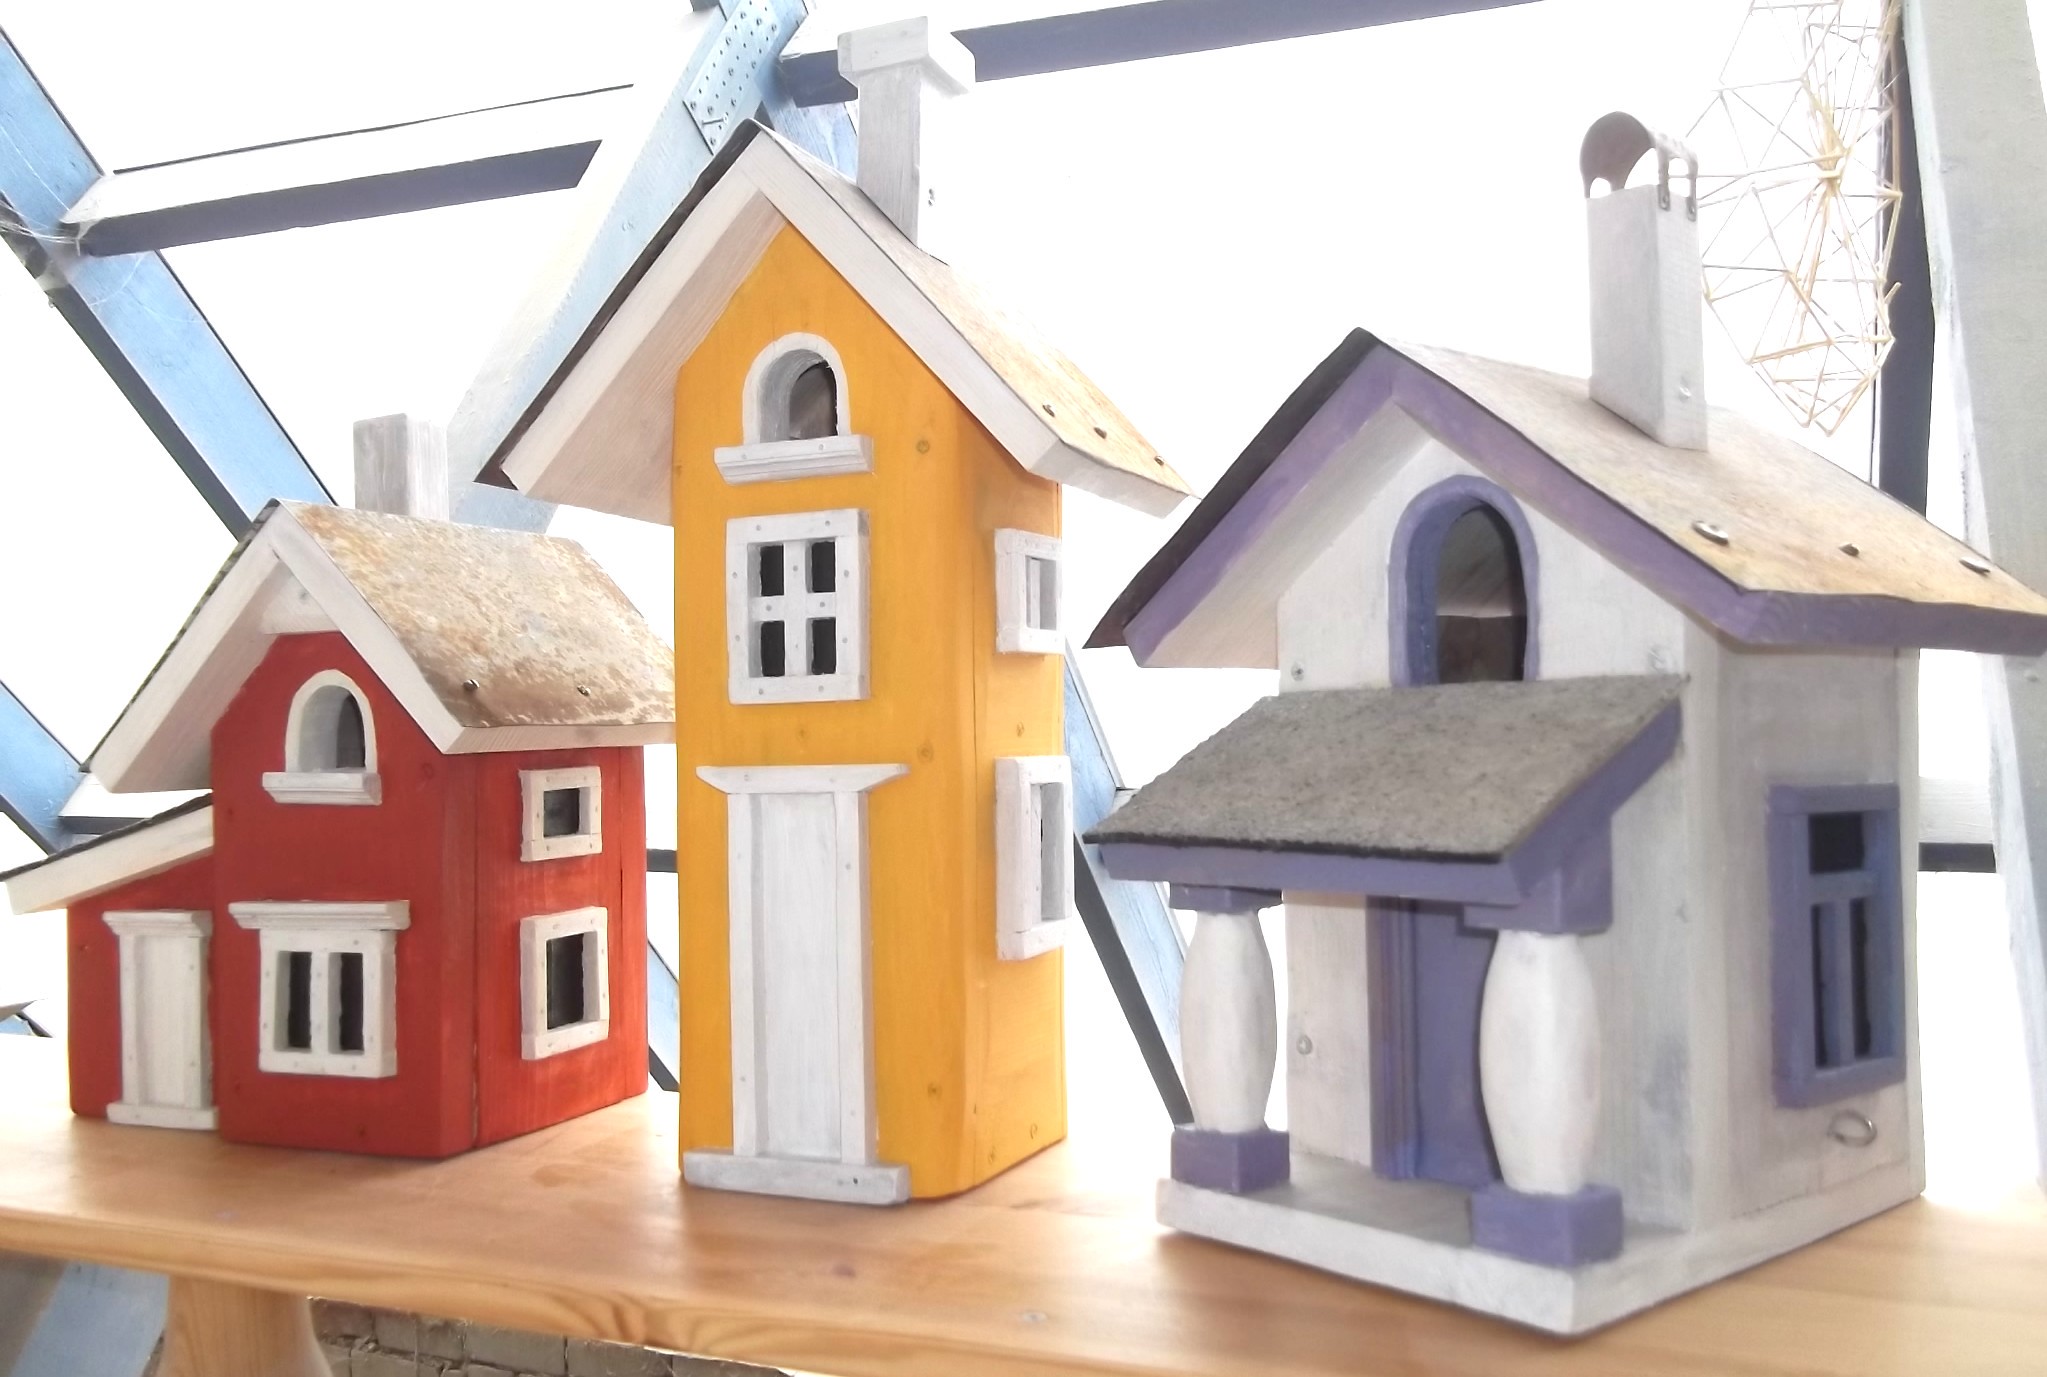 DIY Birdhouse: A Fun and Rewarding Project for Your Backyard